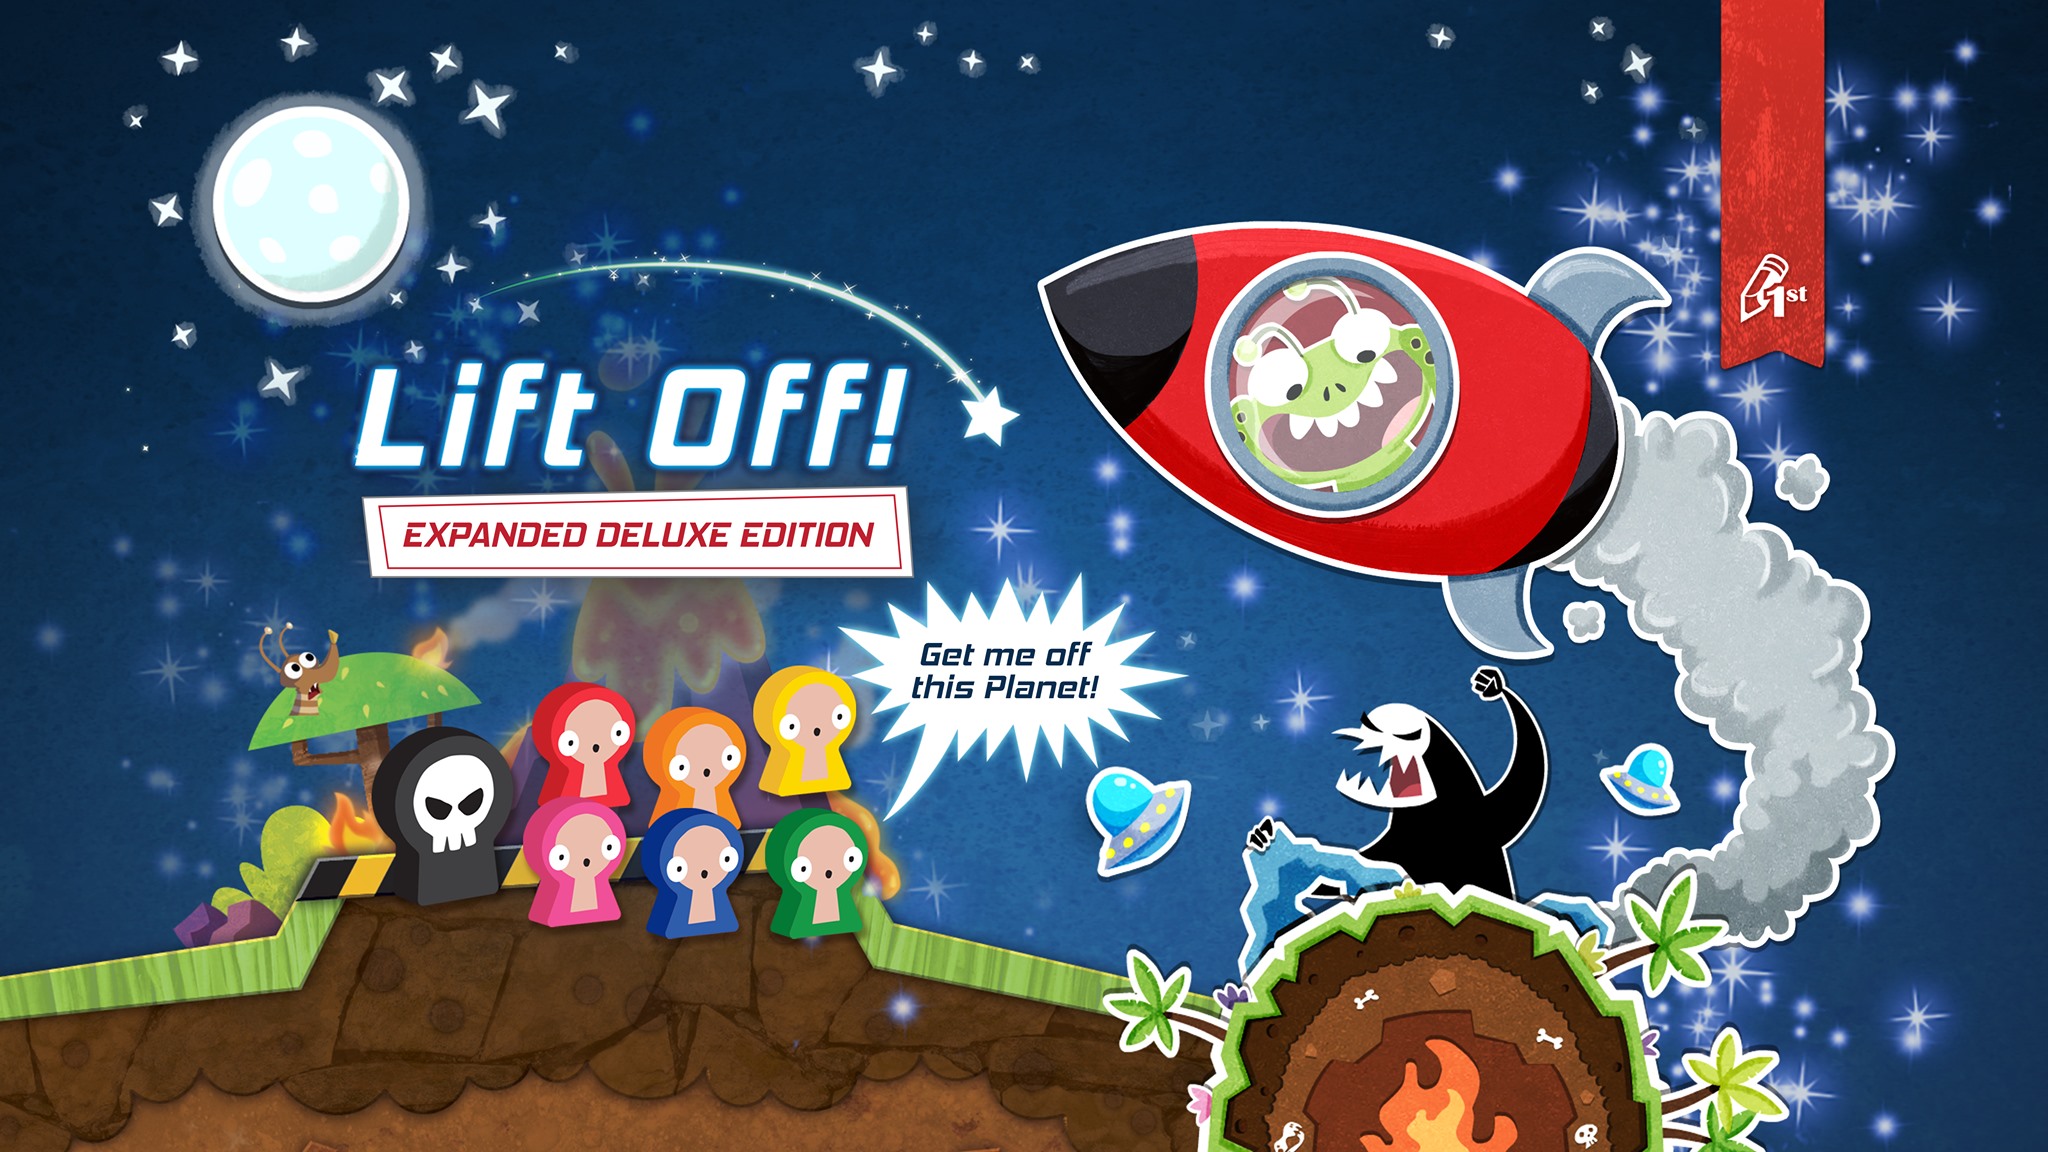 Kickstart This! #161: Lift Off! Get me off this Planet! – Expanded Deluxe Edition